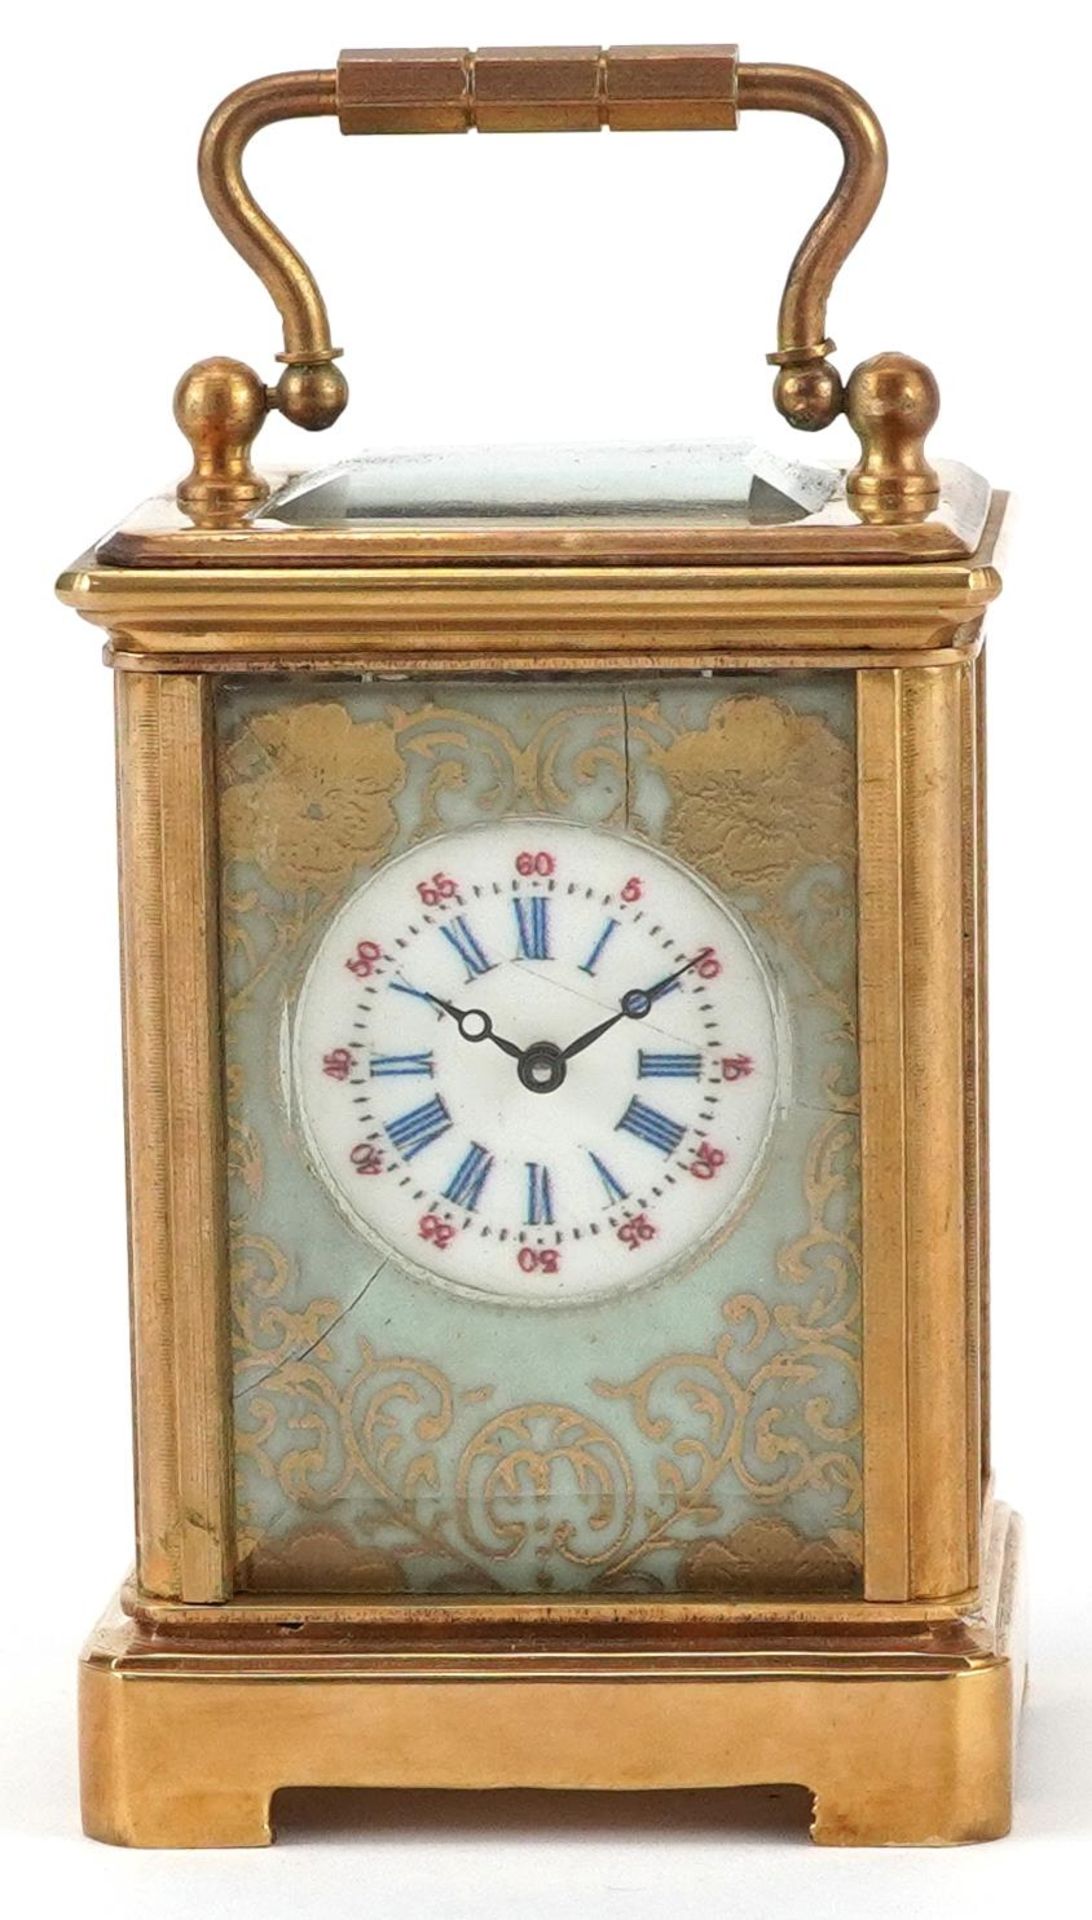 Miniature brass cased carriage clock with Sevres type porcelain panels depicting flowers, 5.5cm high - Image 2 of 8